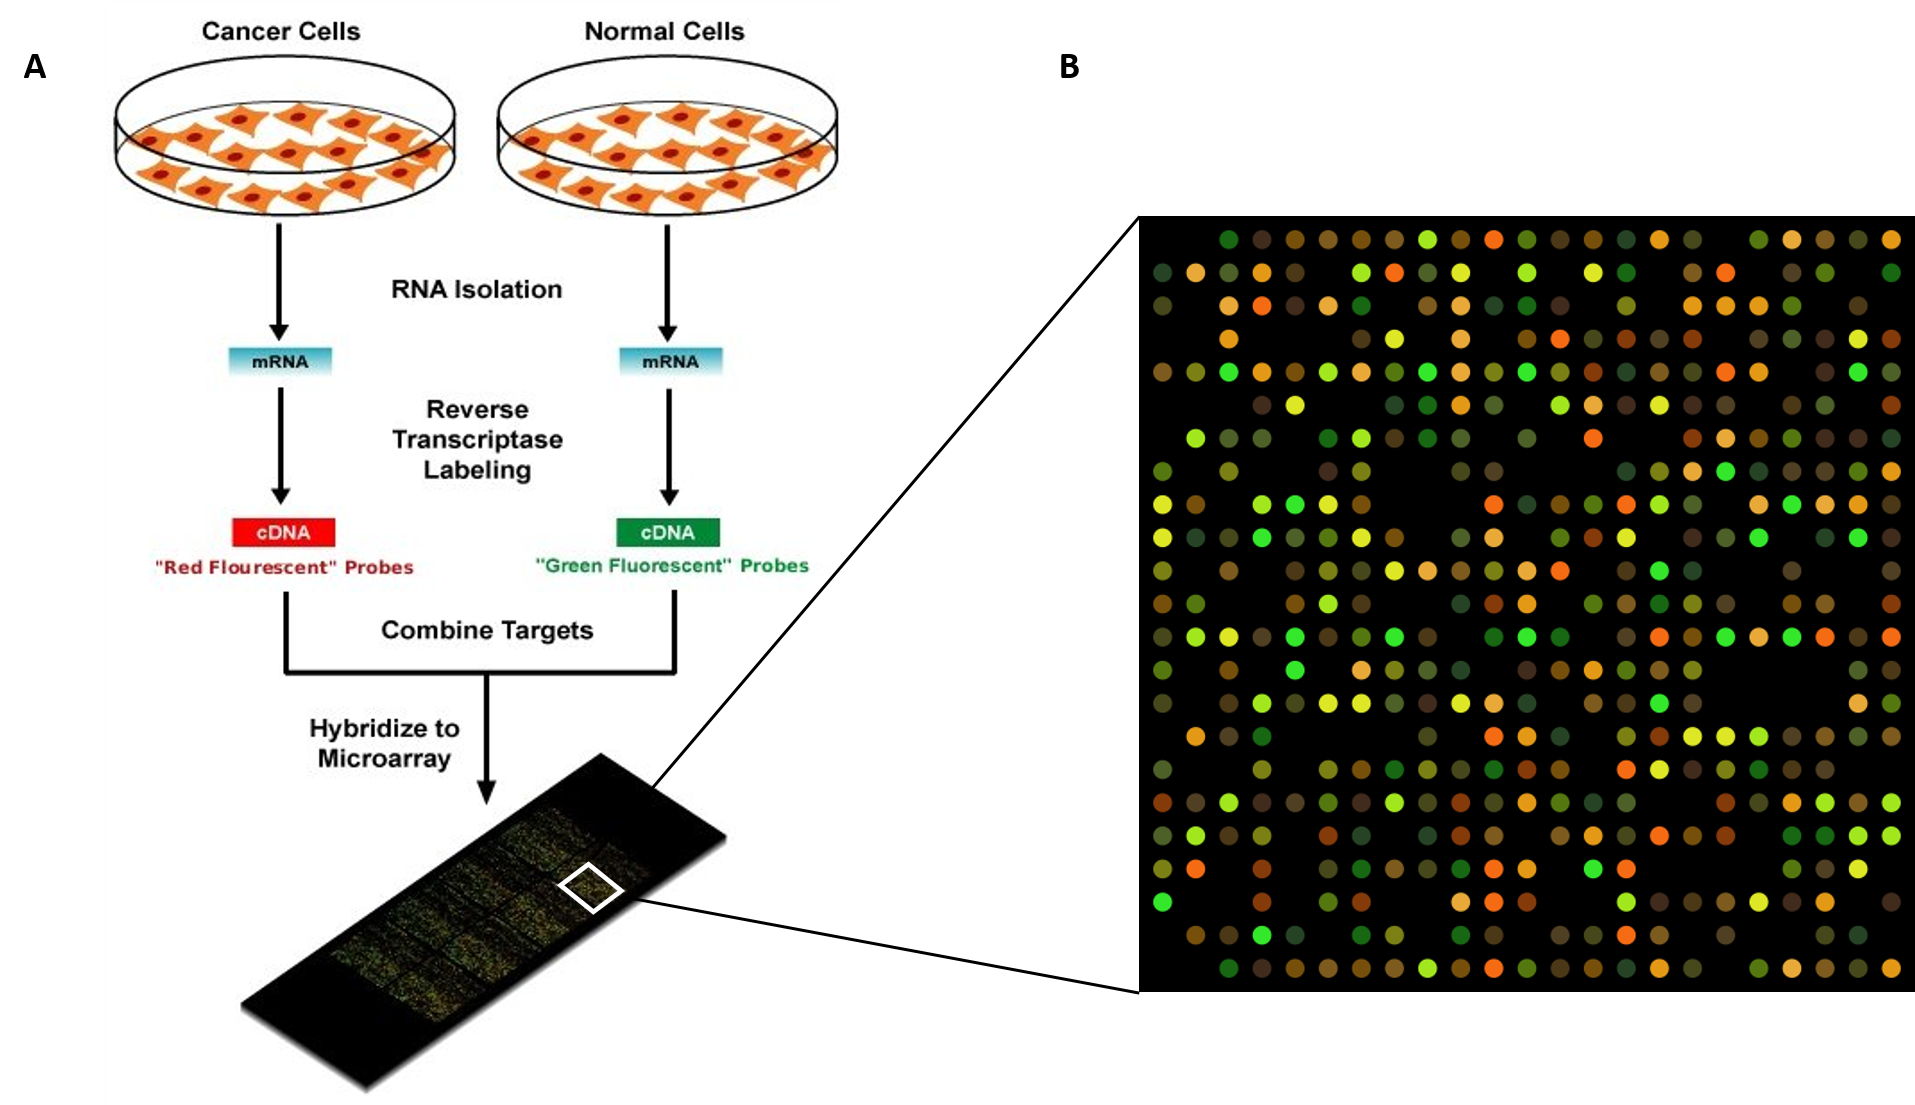 microarray probe to gene r taply